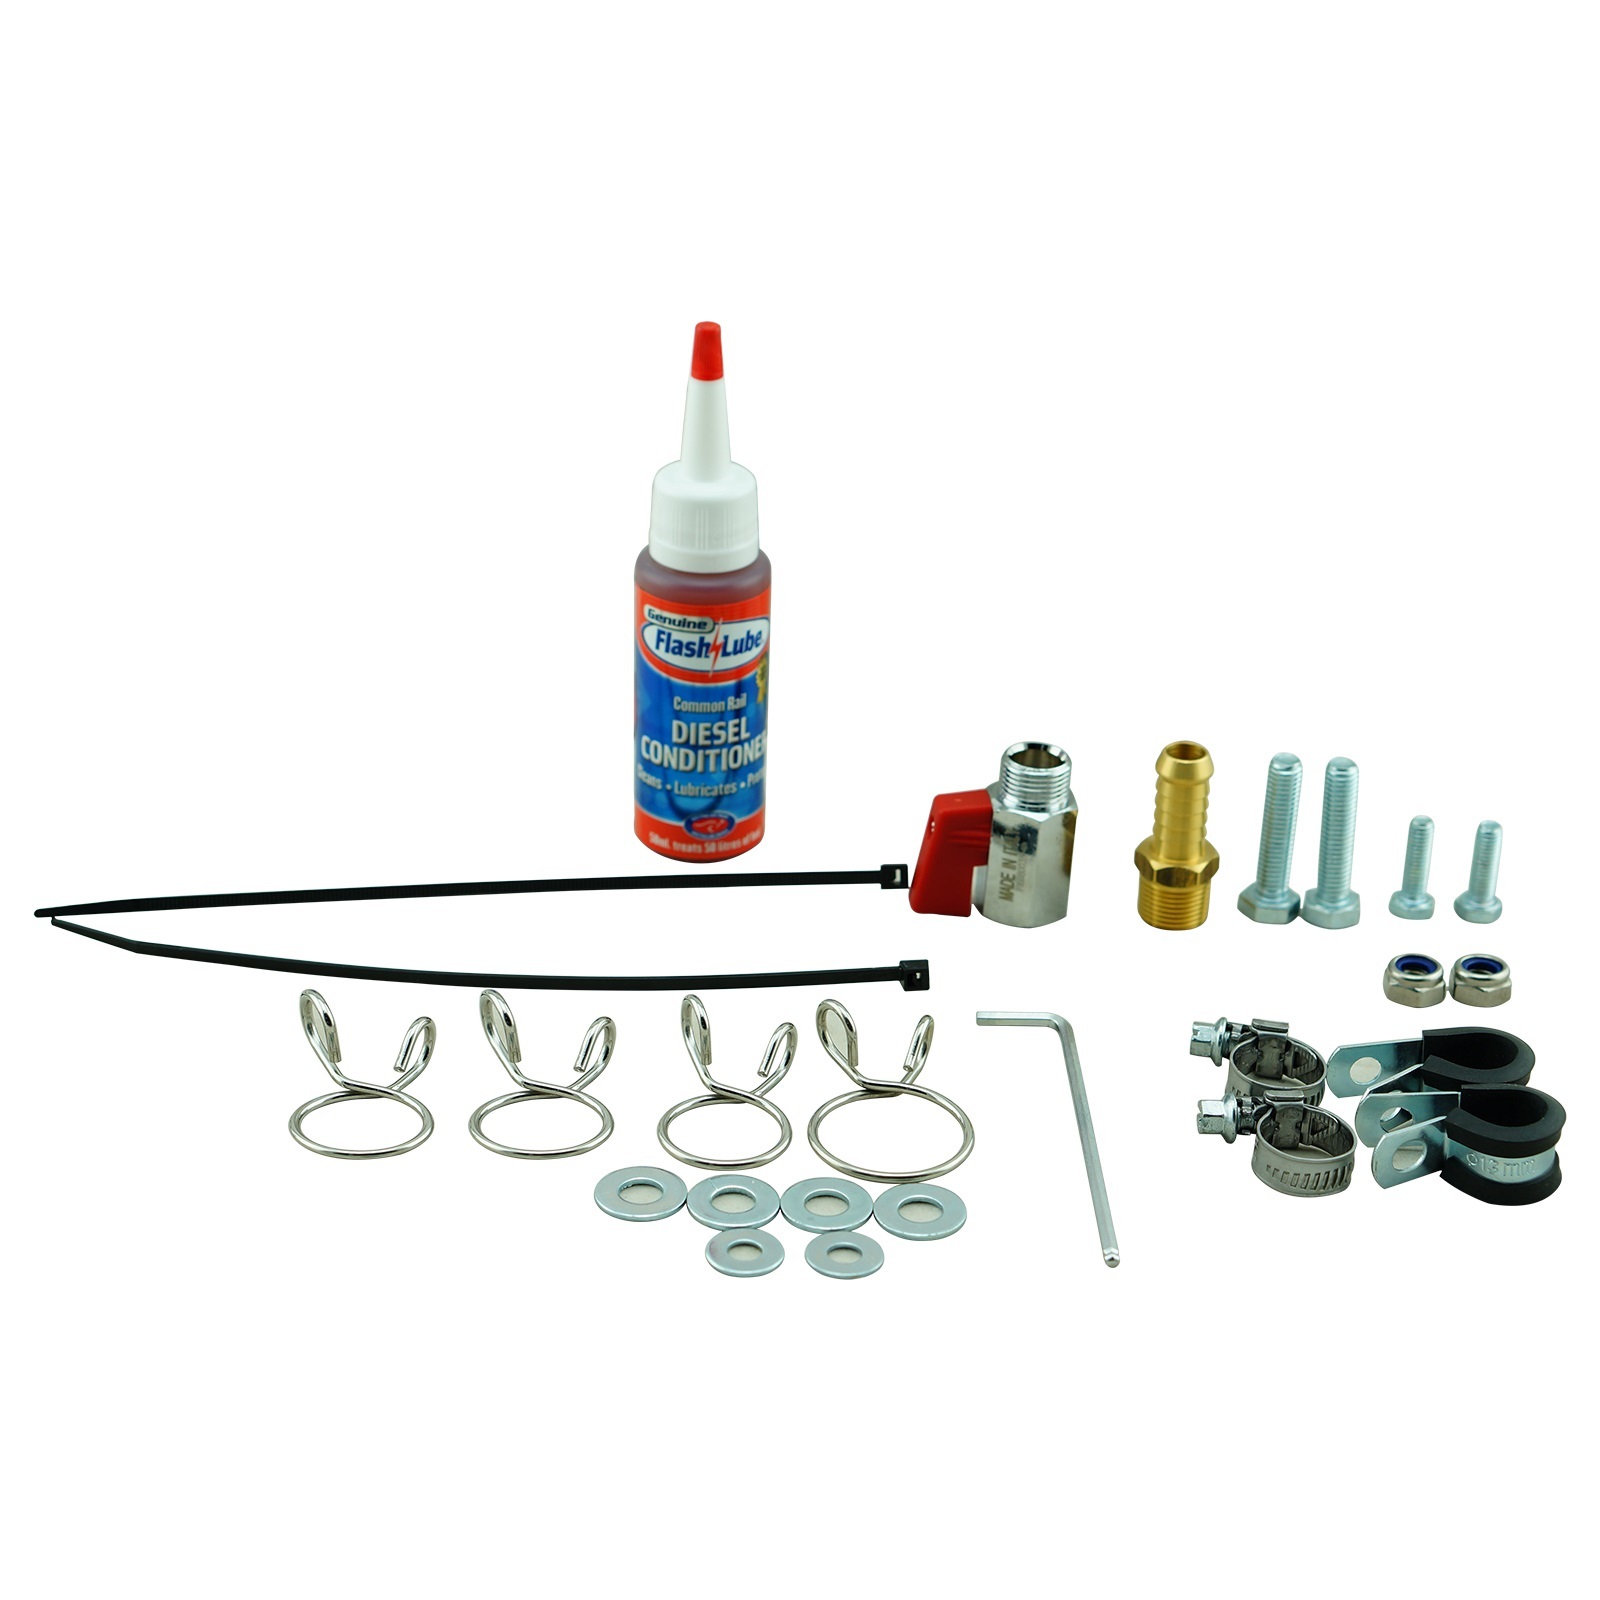 Flashlube Catch Can Pro Kit Ford Ranger PX 2.2, 3.2L P4AT, P5AT 10/2011 Onwards 